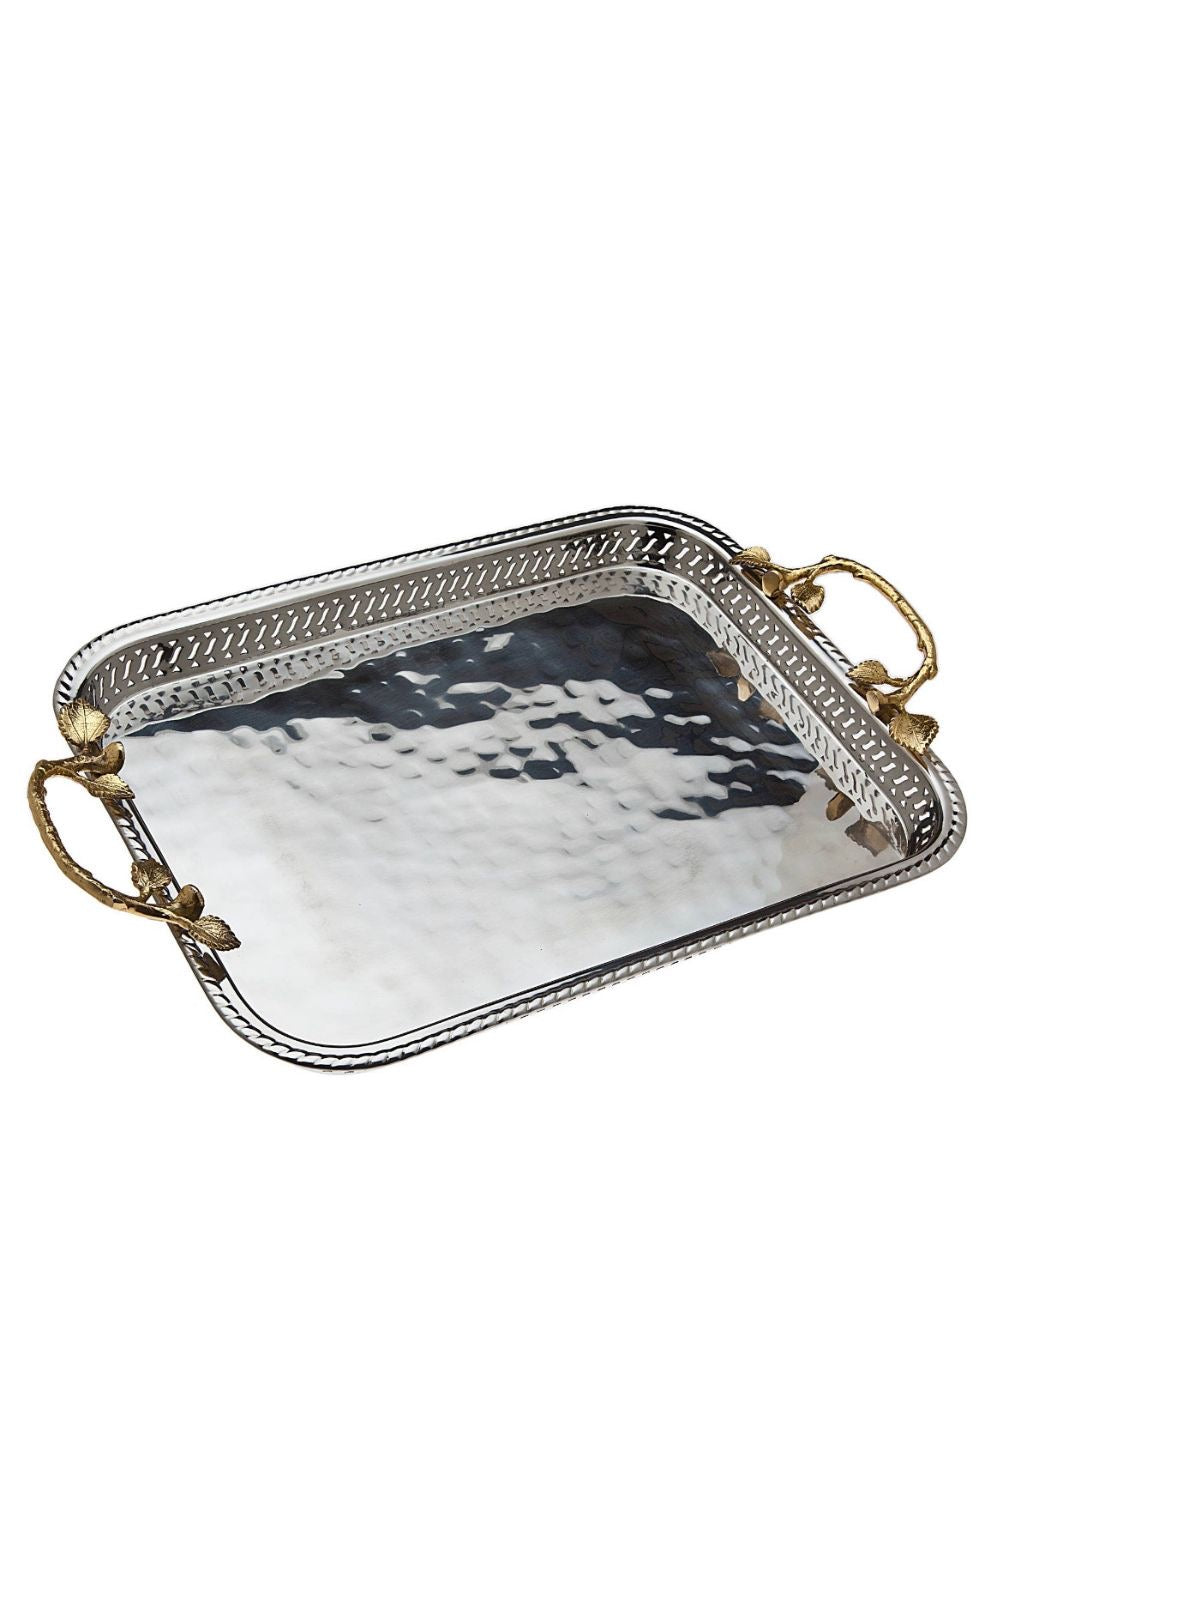 Stainless Steel Gallery Tray with Gold Leaf Designed Handles, Measures 16.25L.